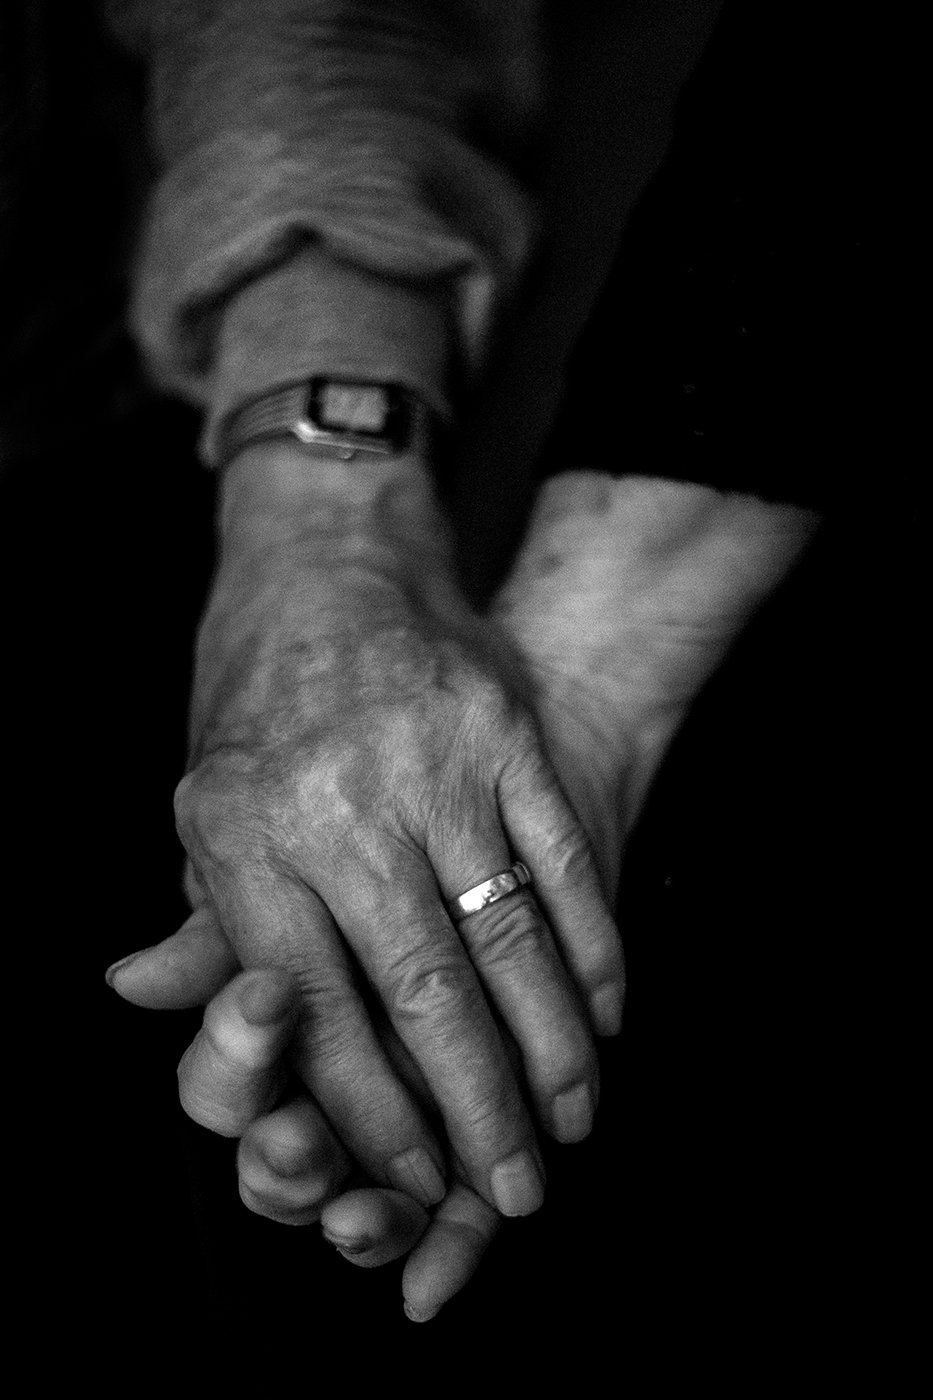 Photographer Sean's grandparents holding hands in black and white